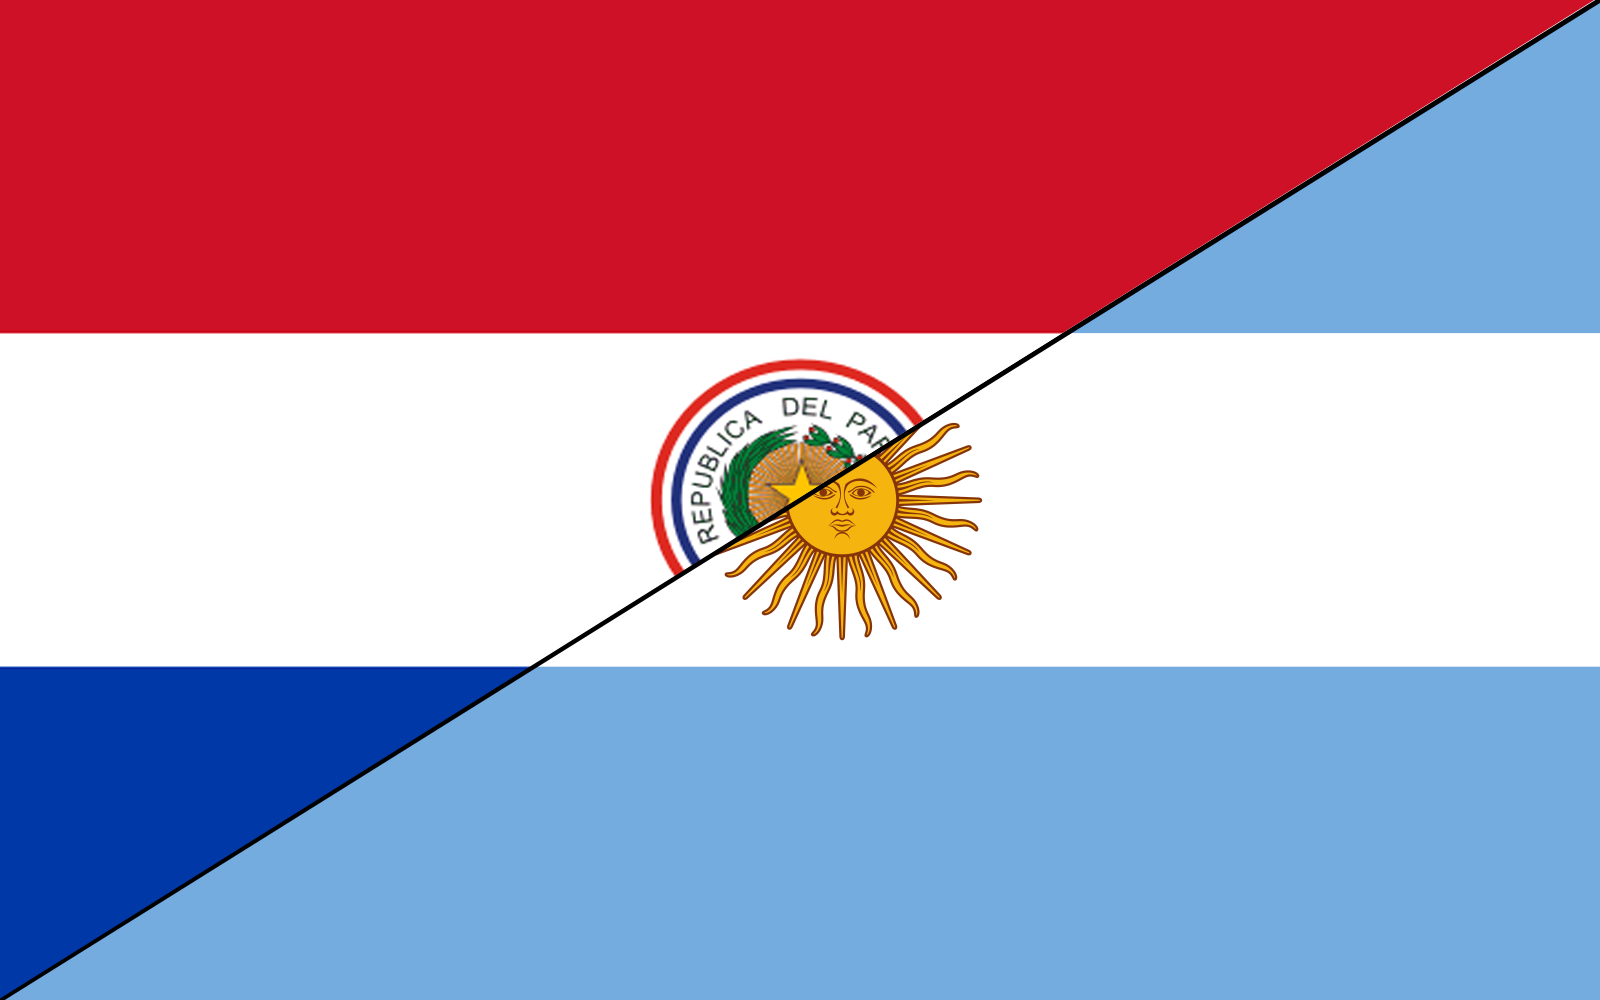 Argentina is a strategic ally of Paraguay since 78% of its exports go to Buenos Aires' ports for shipment to the final destination, besides being the channel for key imports, such as fuels.